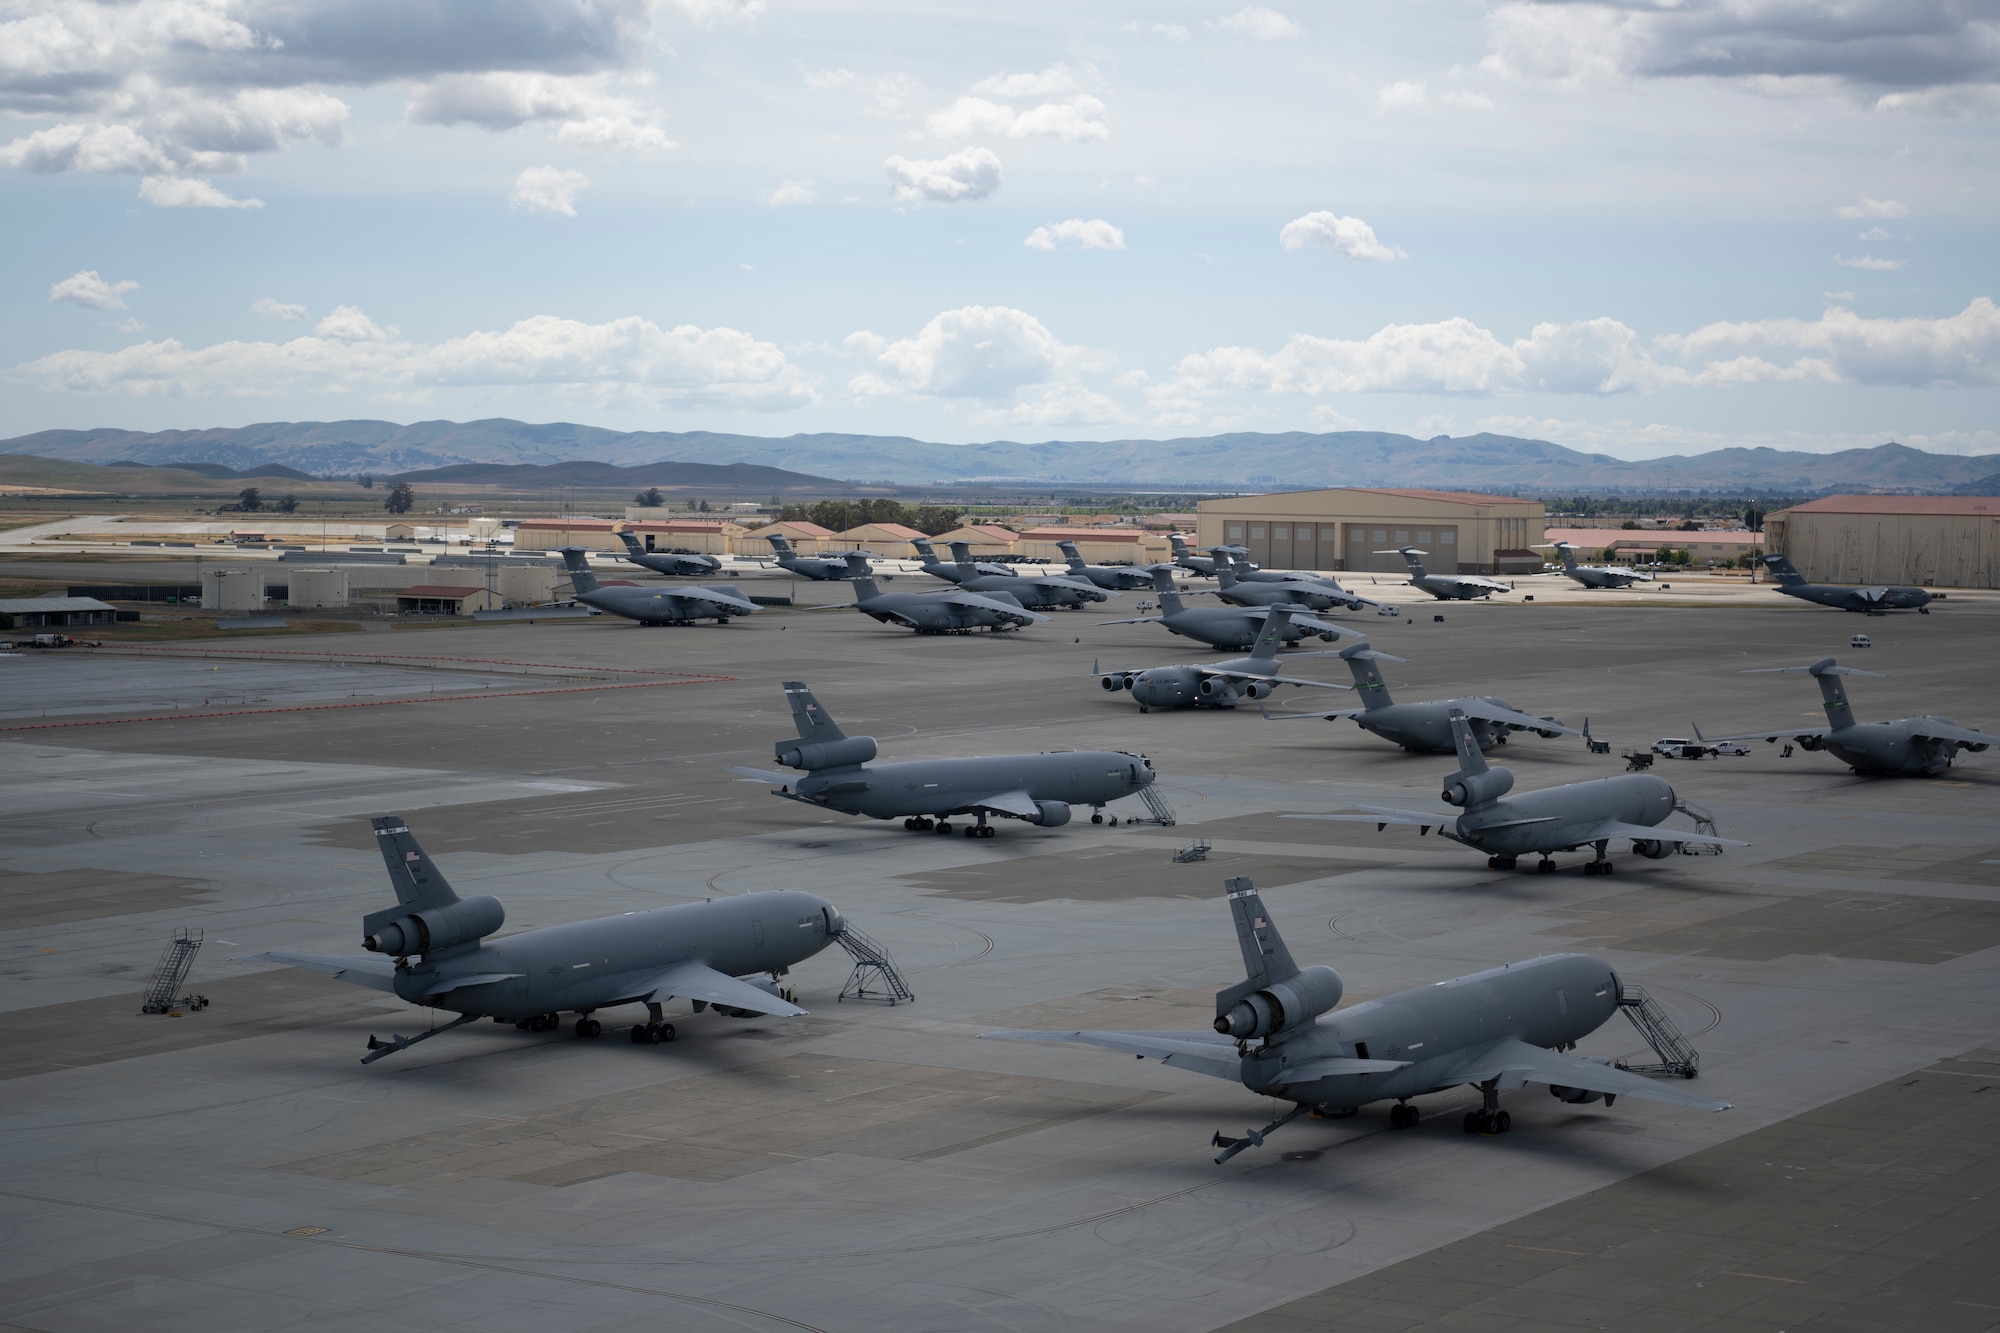 Aircraft assigned to Travis Air Force Base, California sit on the flight line